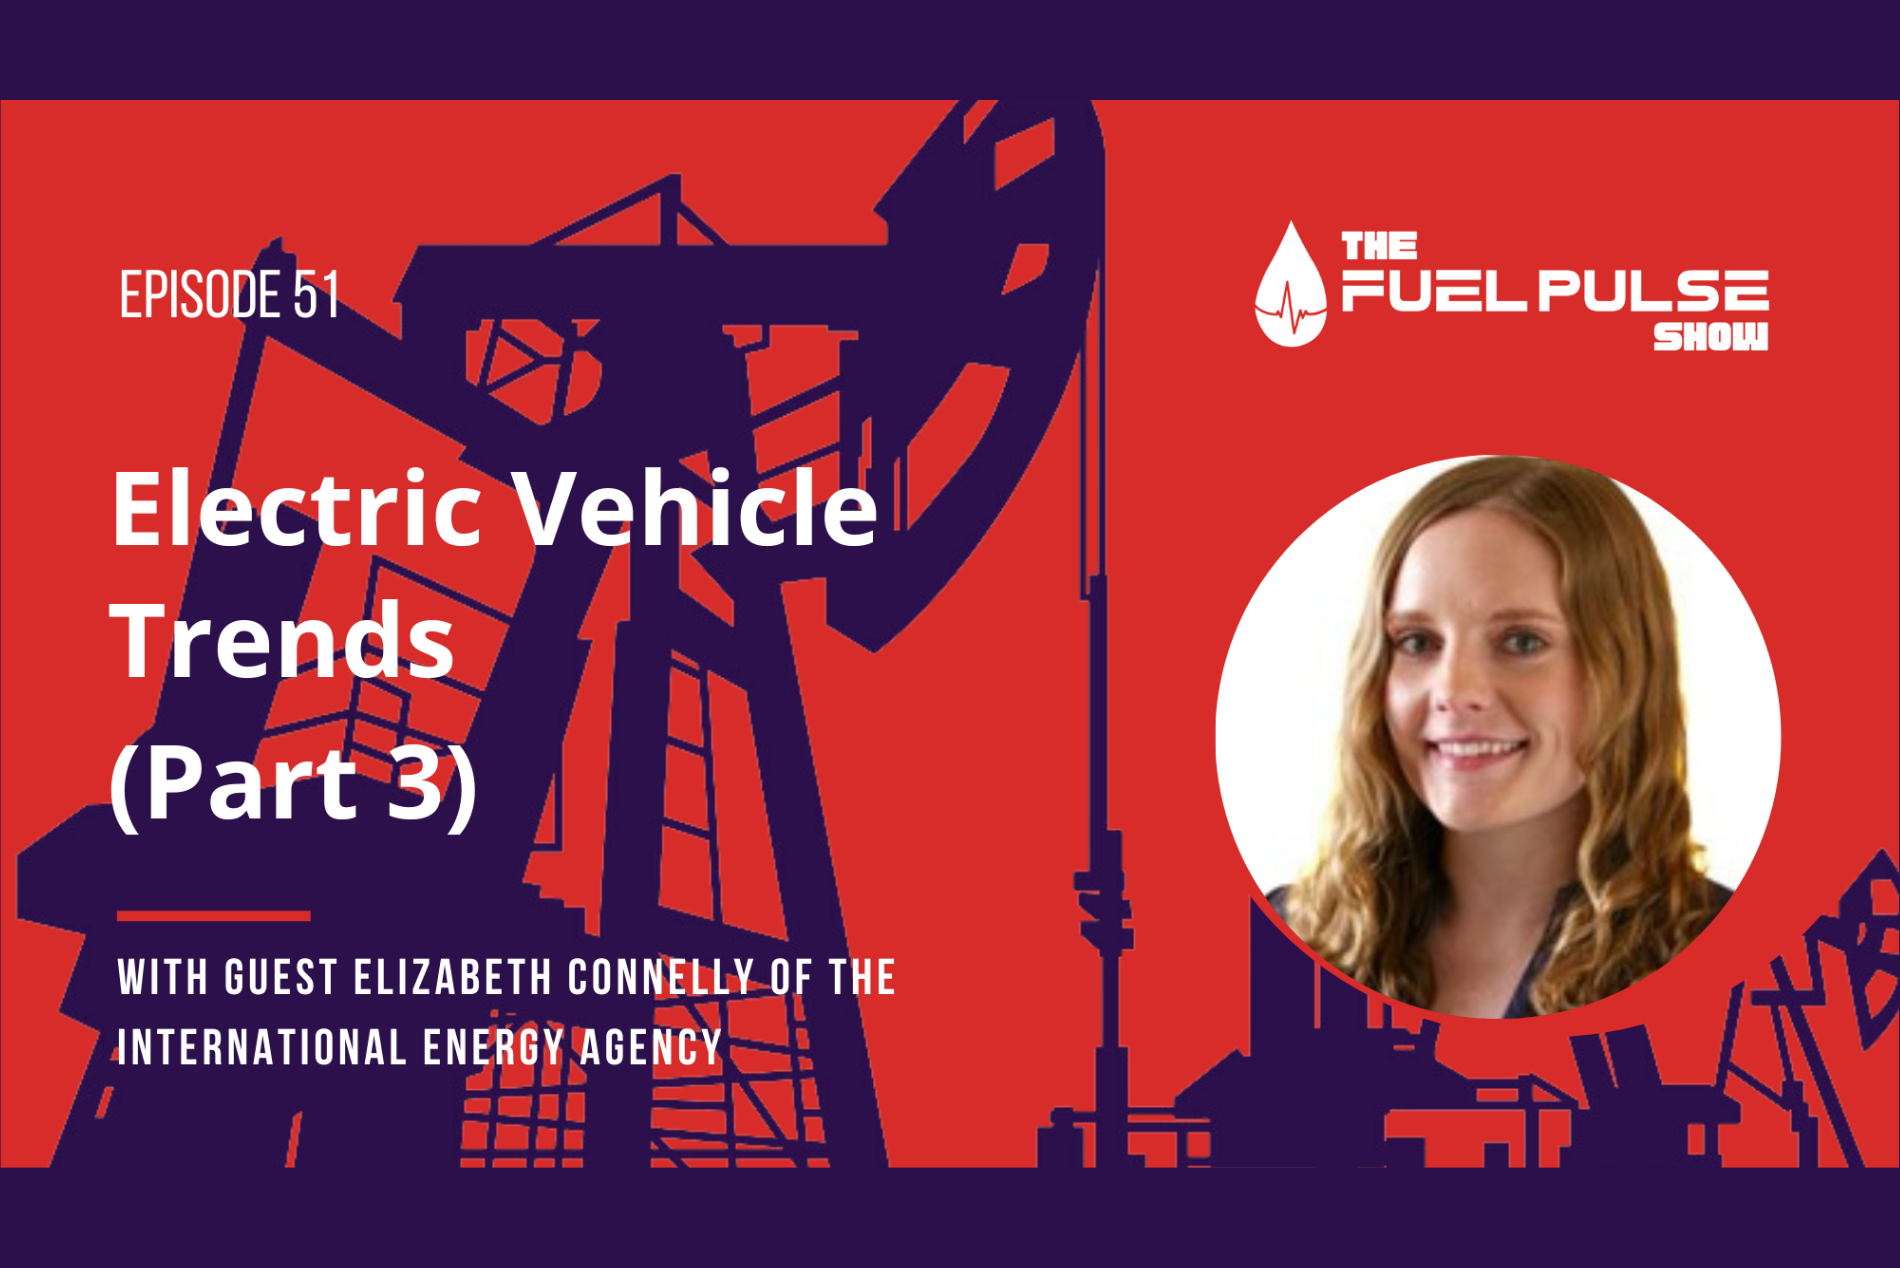 Episode 051 - Electric Vehicle Trends with Elizabeth Connelly - Part 3